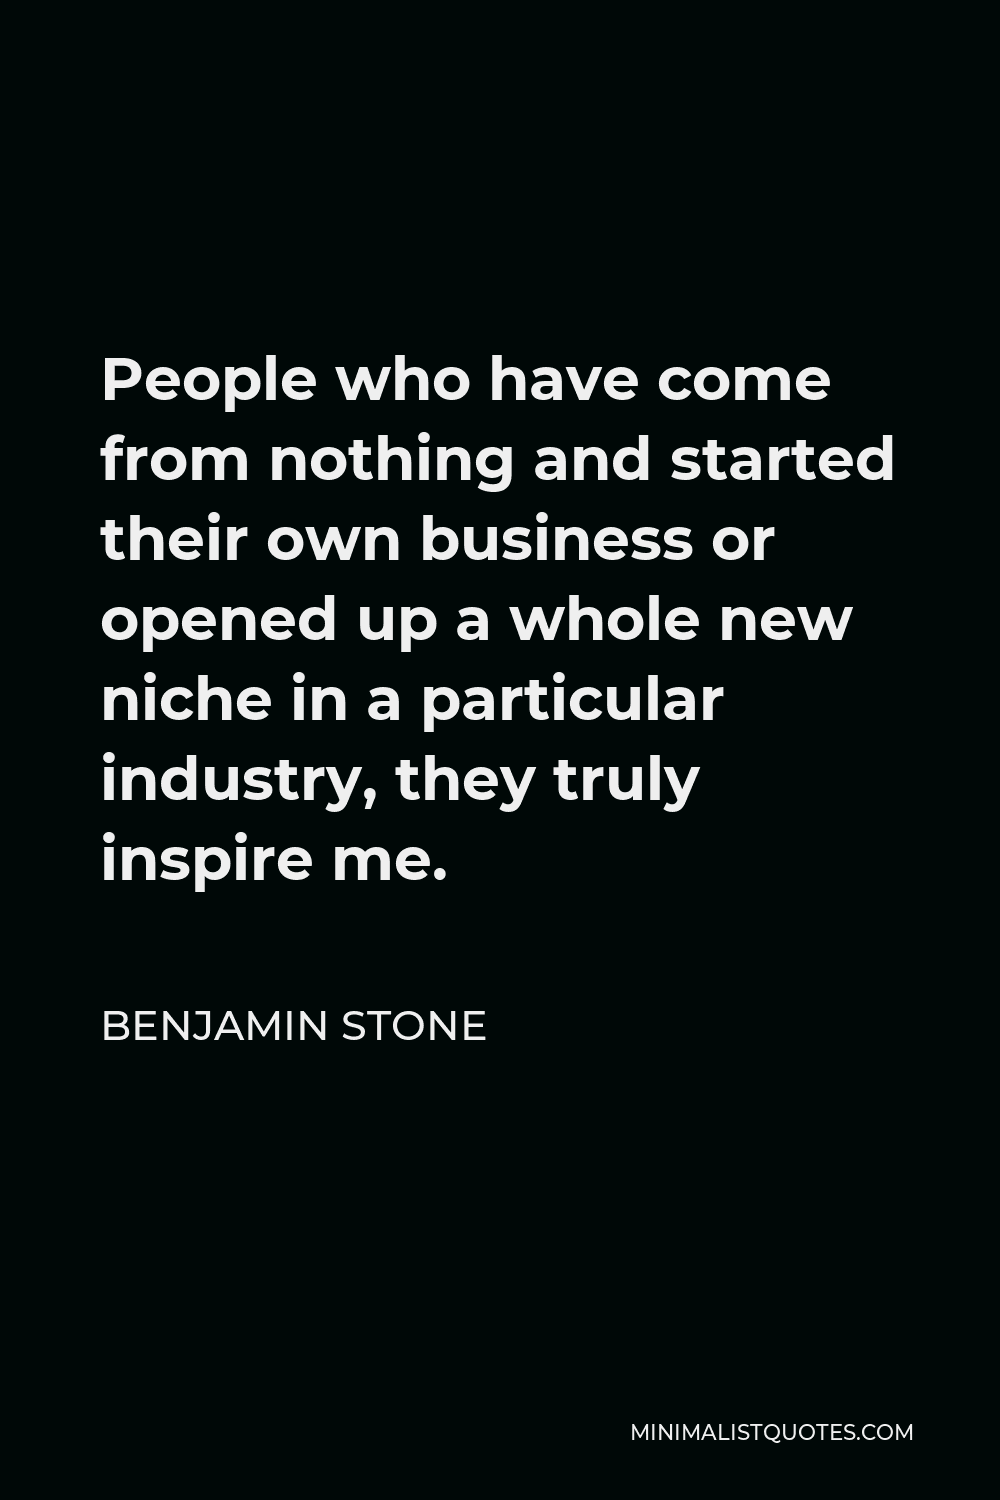 Benjamin Stone Quote - People who have come from nothing and started their own business or opened up a whole new niche in a particular industry, they truly inspire me.